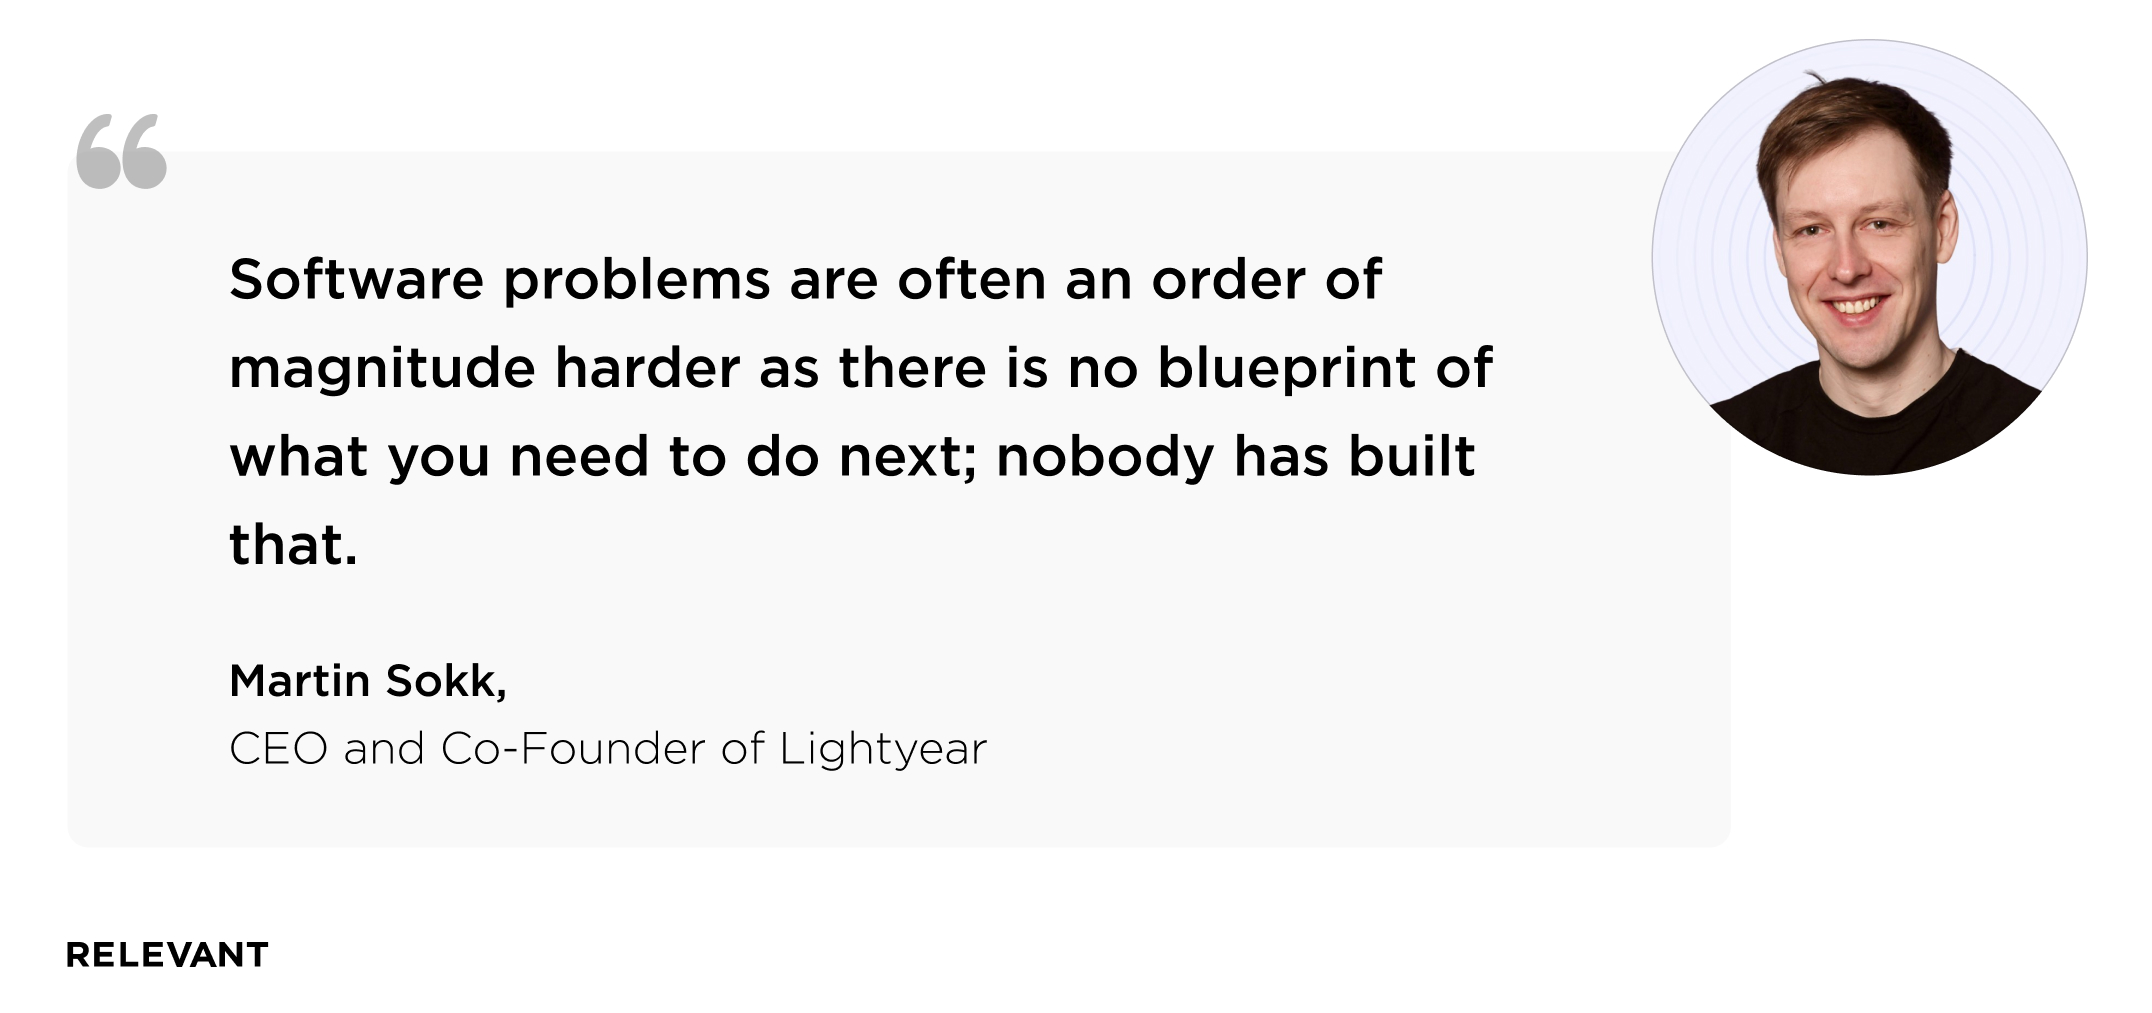 Software problems are often an order of magnitude harder as there is no blueprint of what you need to do next; nobody has built that. Martin Sokk, CEO and co-founder of Lightyear